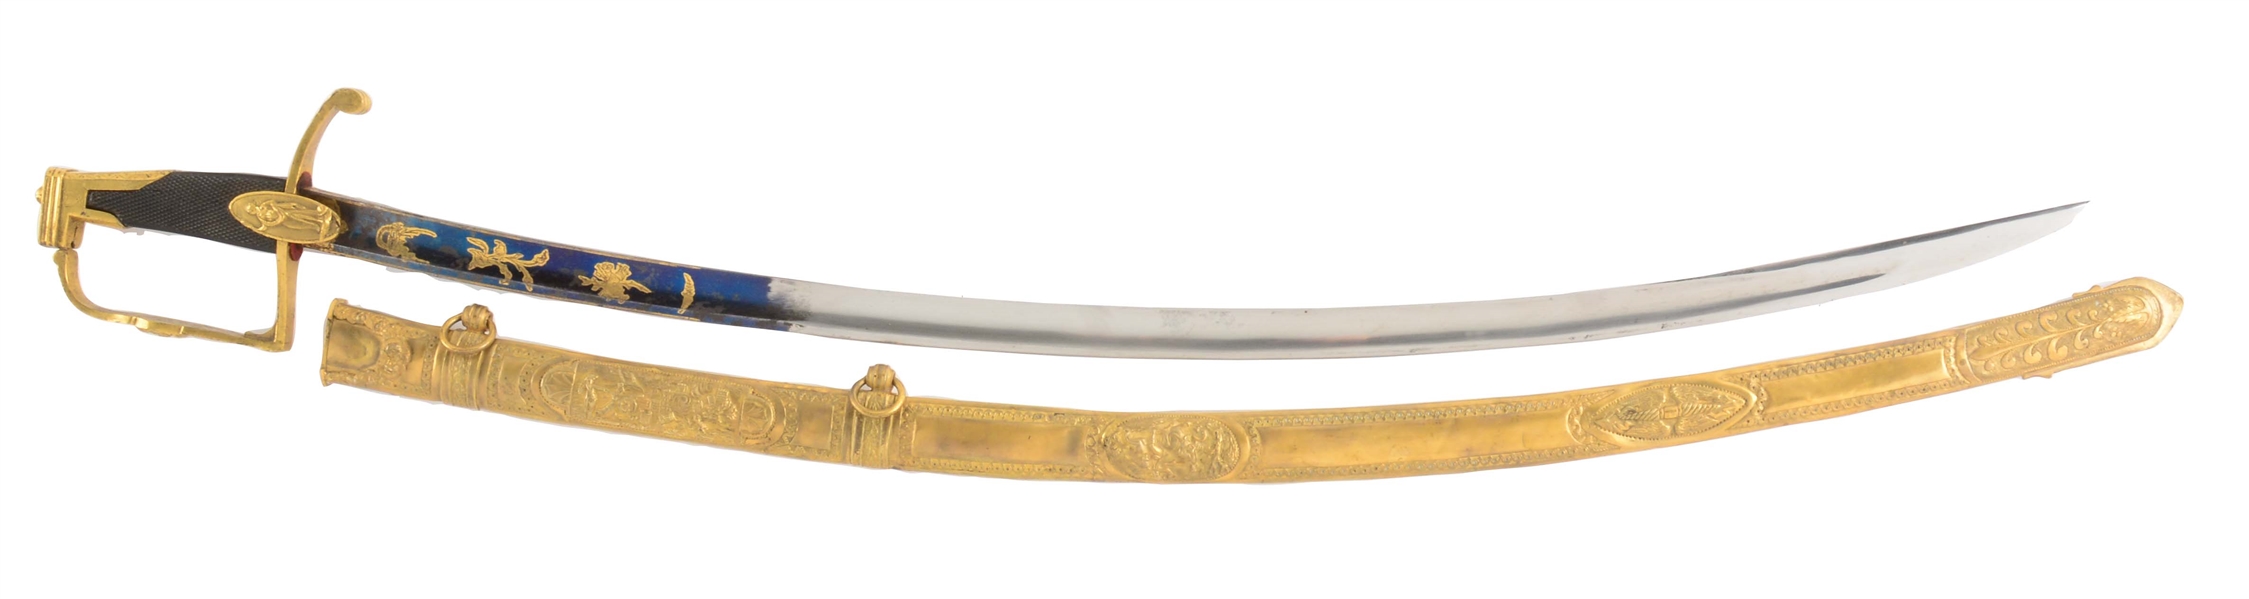 FINE FRENCH NAPOLEONIC OFFICERS SABER.